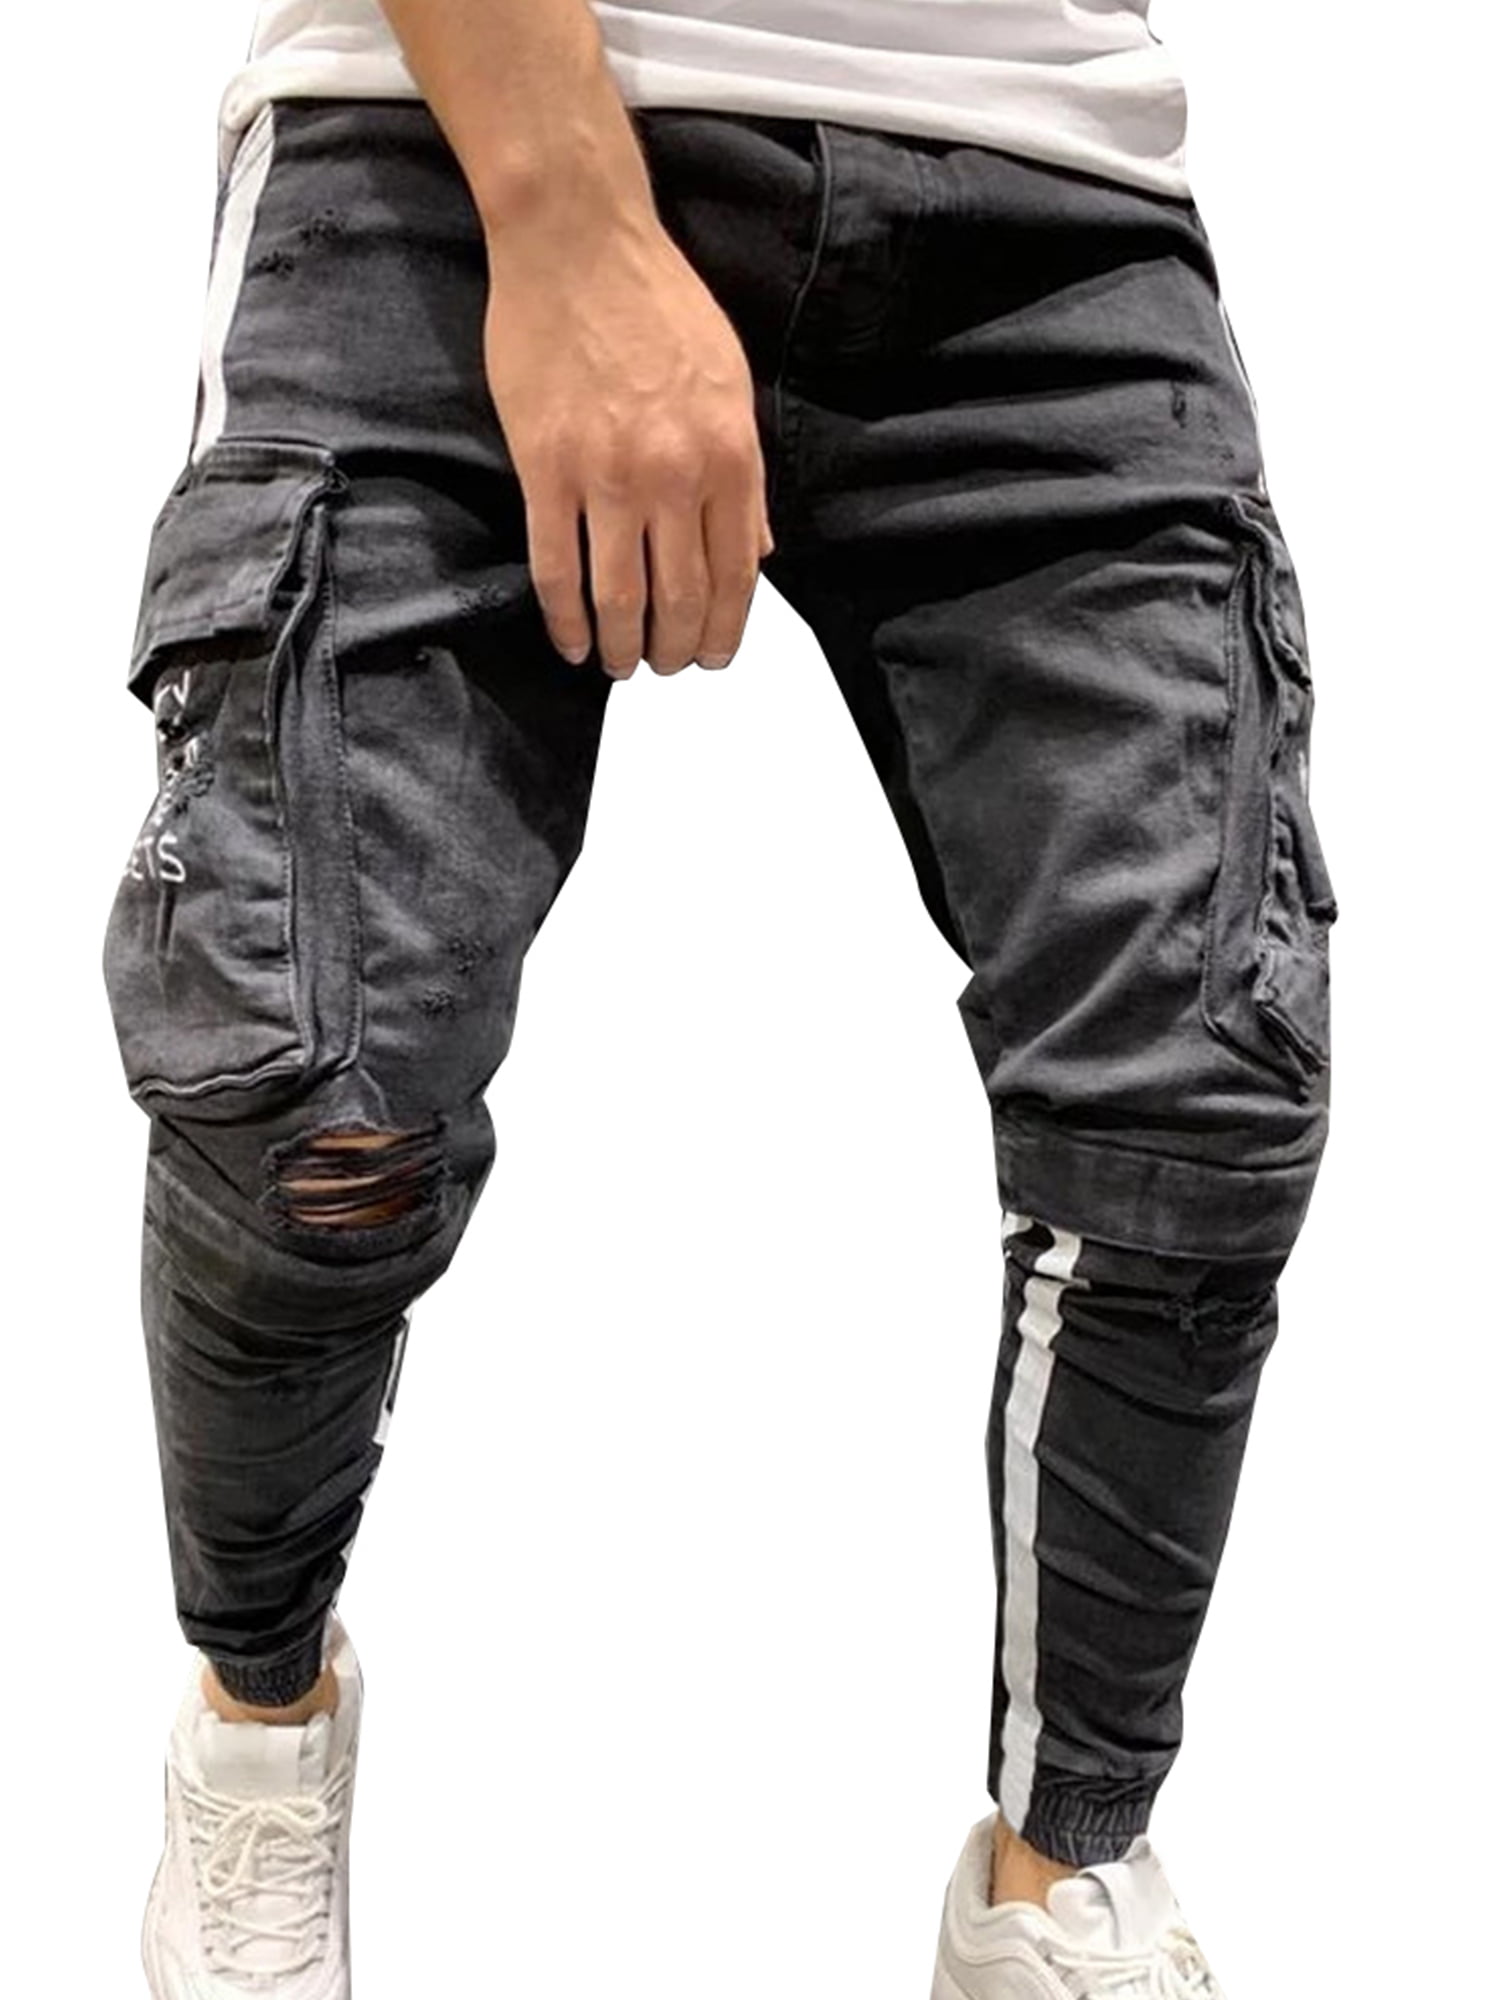 Palarn Sports Pants Casual Cargo Shorts Mens Stretchy Ripped Skinny Biker Jeans Destroyed Taped Slim Fit Denim Pants 